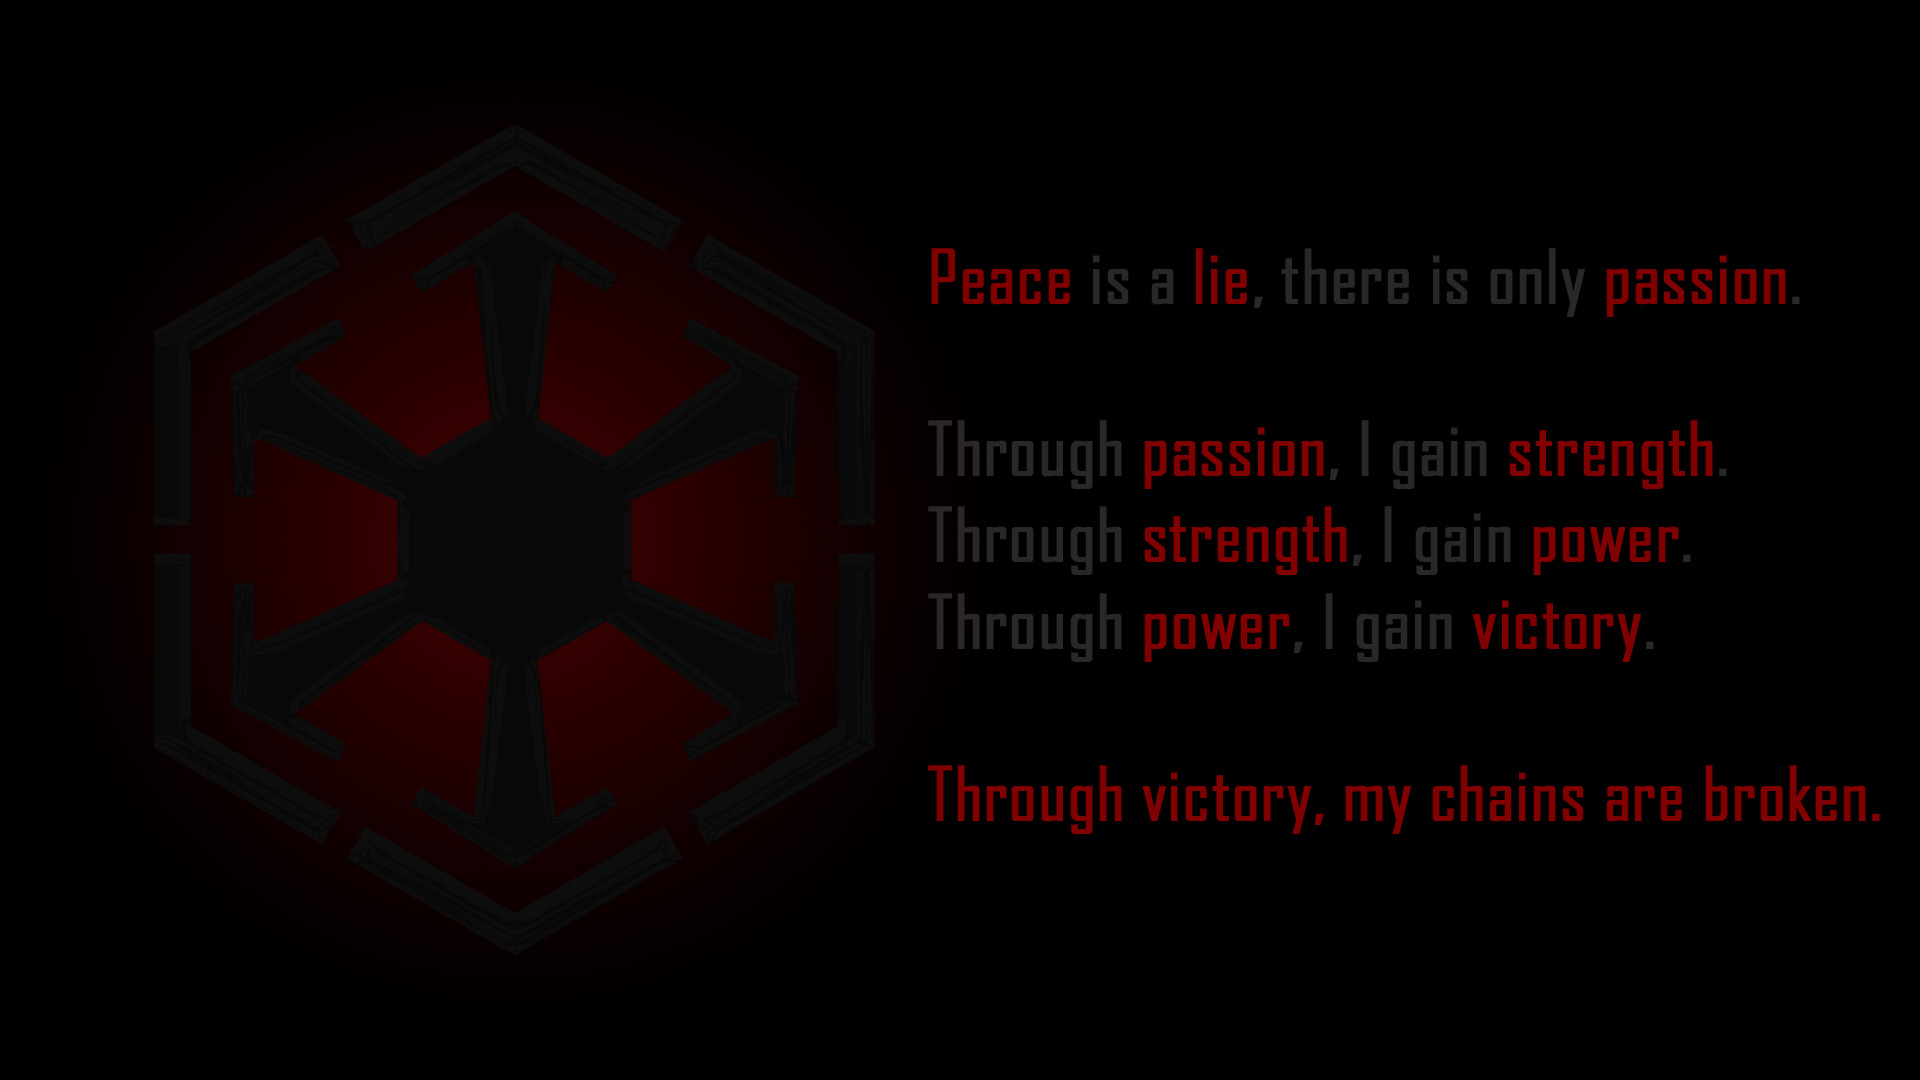 Star Wars Wallpapers with Sith Code The Art Mad Wallpapers 1920x1080